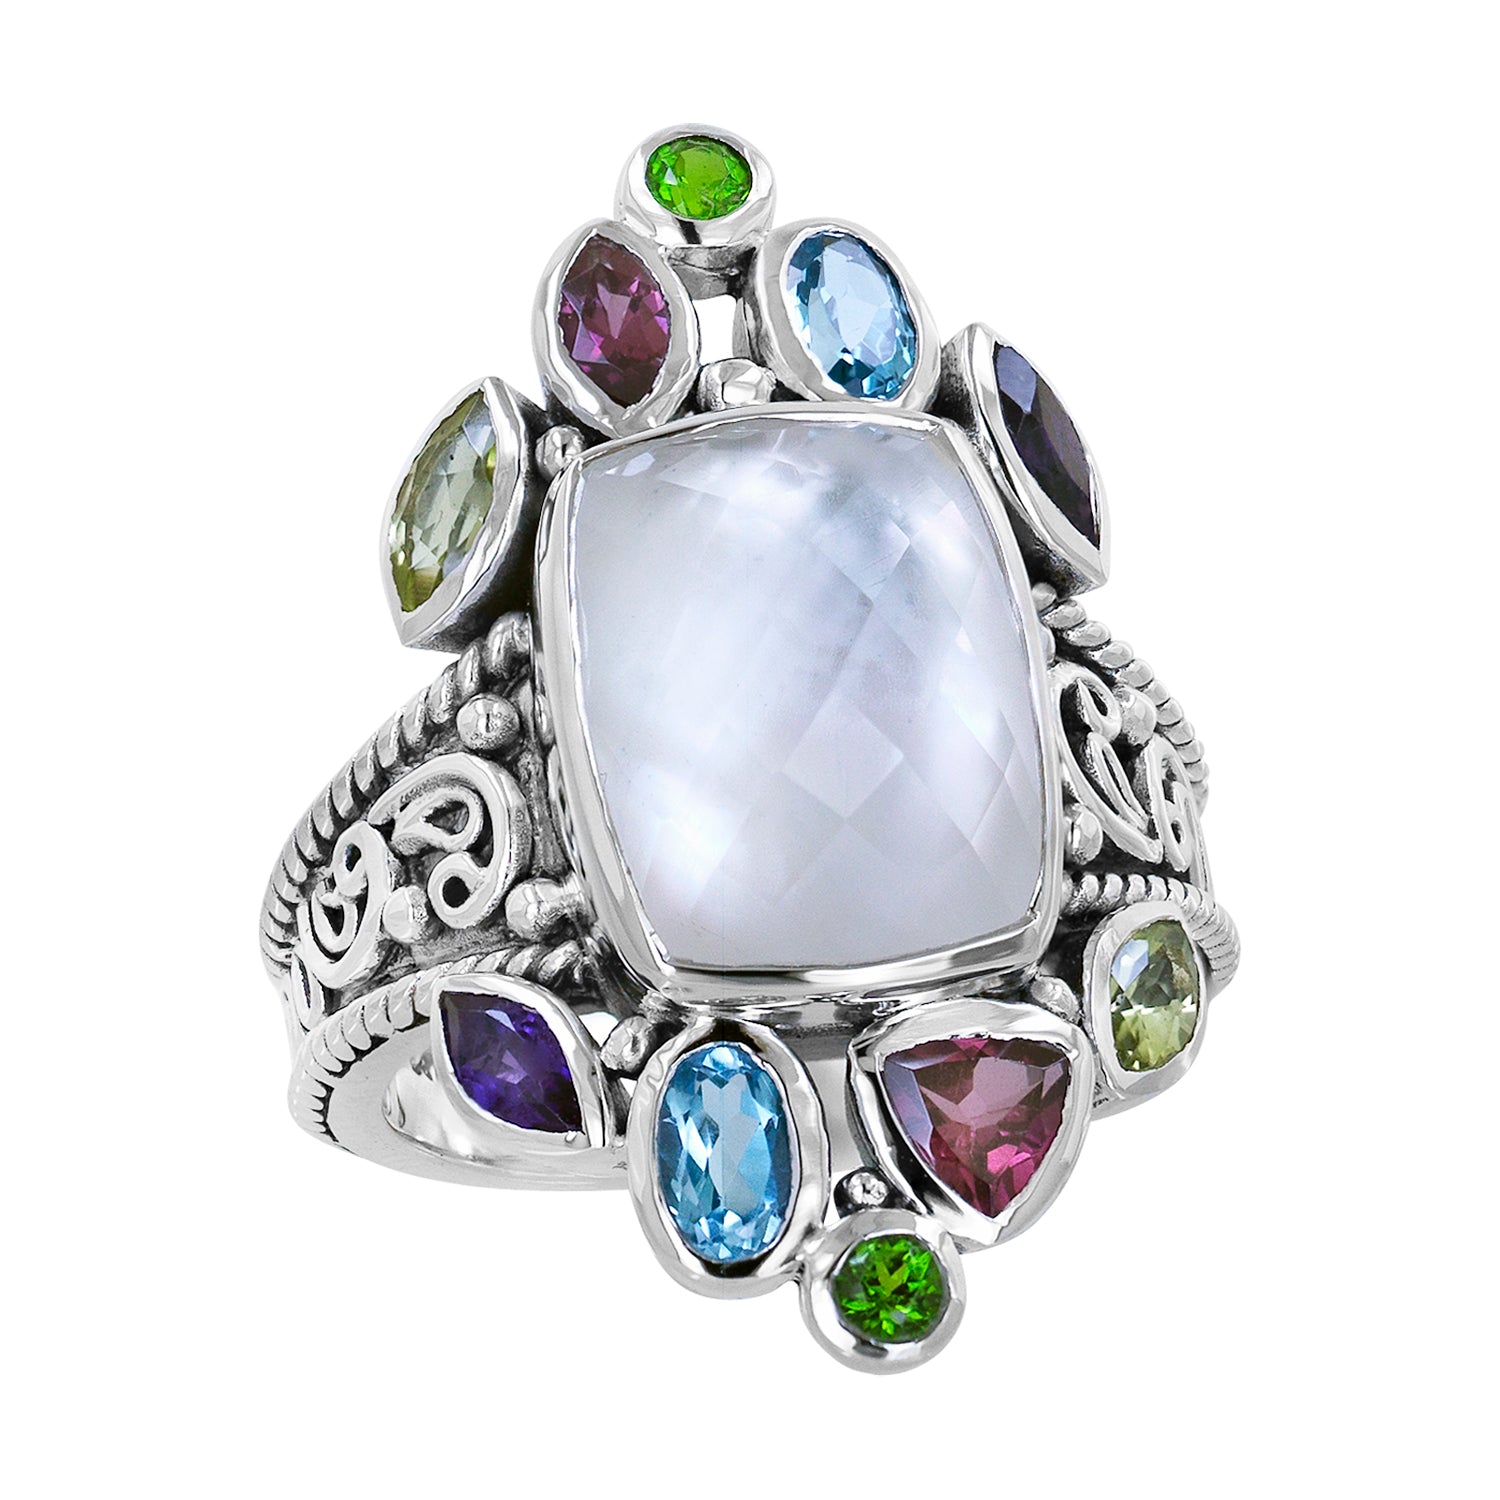 Sterling silver ring with large Mother of Pearl and multi-colored gemstones